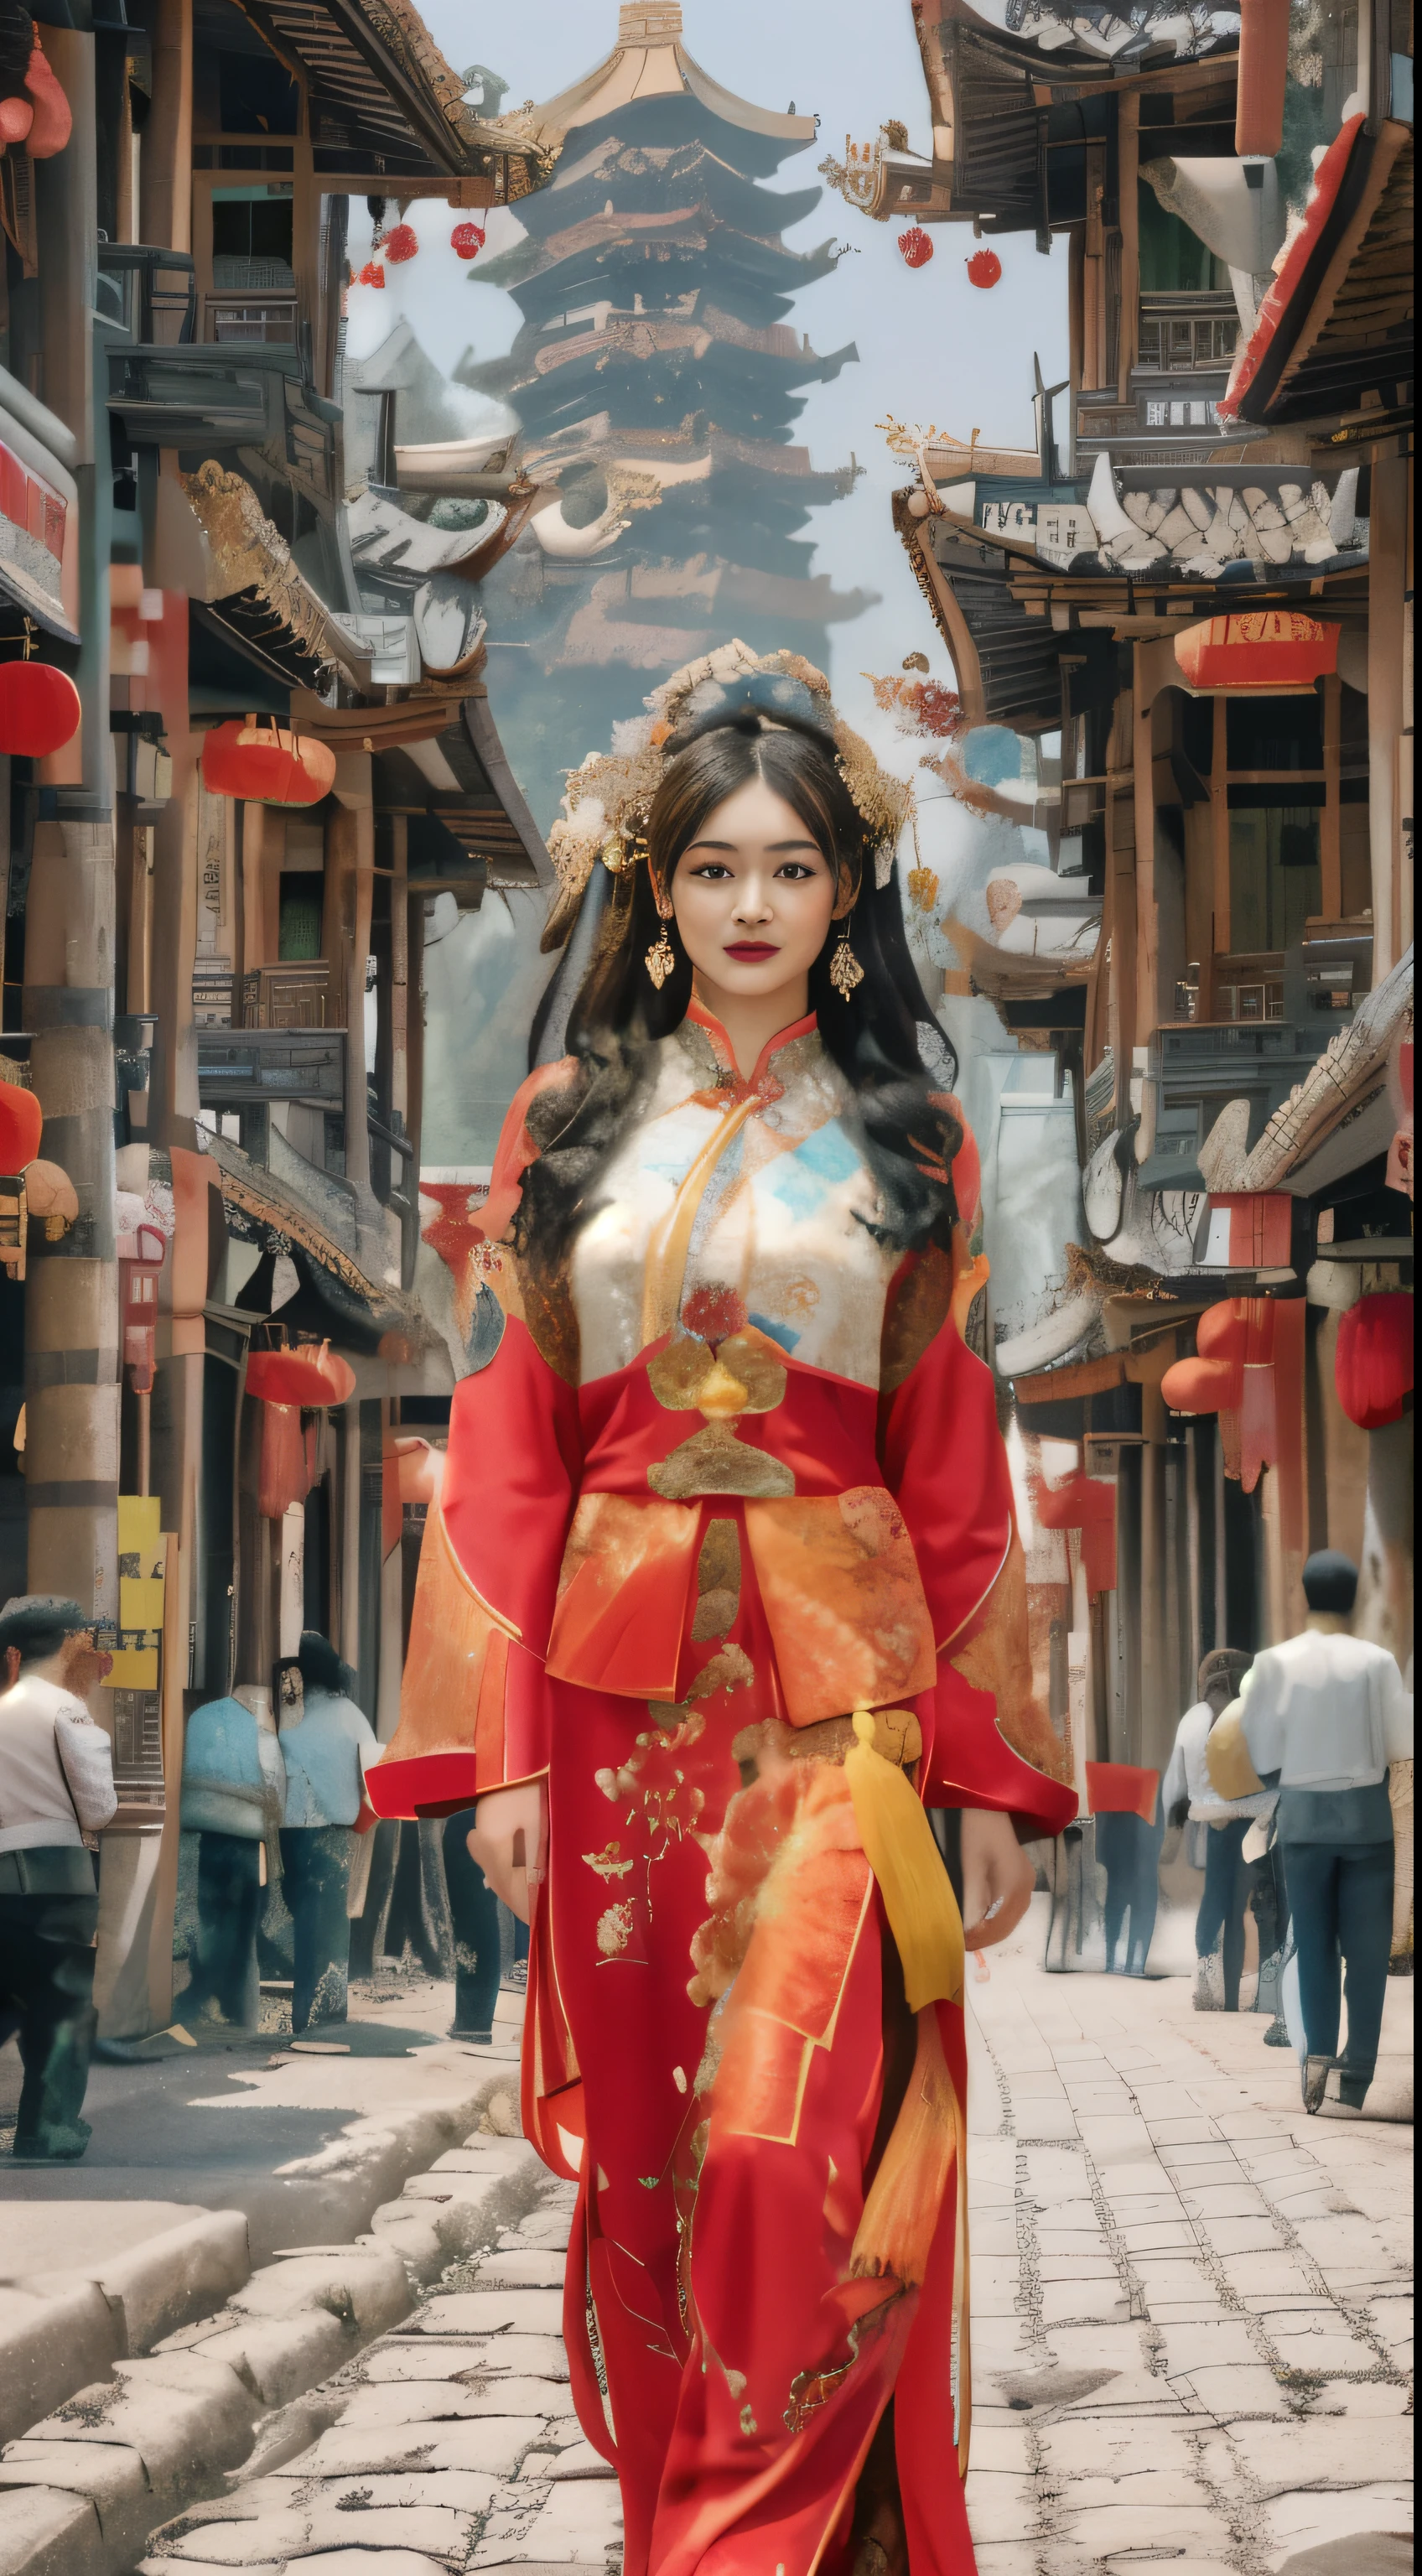 Woman in red and white dress walking on the streets of Chinese city, palace ， A girl wearing hanfu, hanfu, Matching Chinese clothing, Chinese traditional clothing, wearing chinese clothes, Hanfu, Sha Xi, Chinese girl, full body xianxia, cheongsam, Chinese style, chinese woman, chinese princess, clothed in ancient street wear